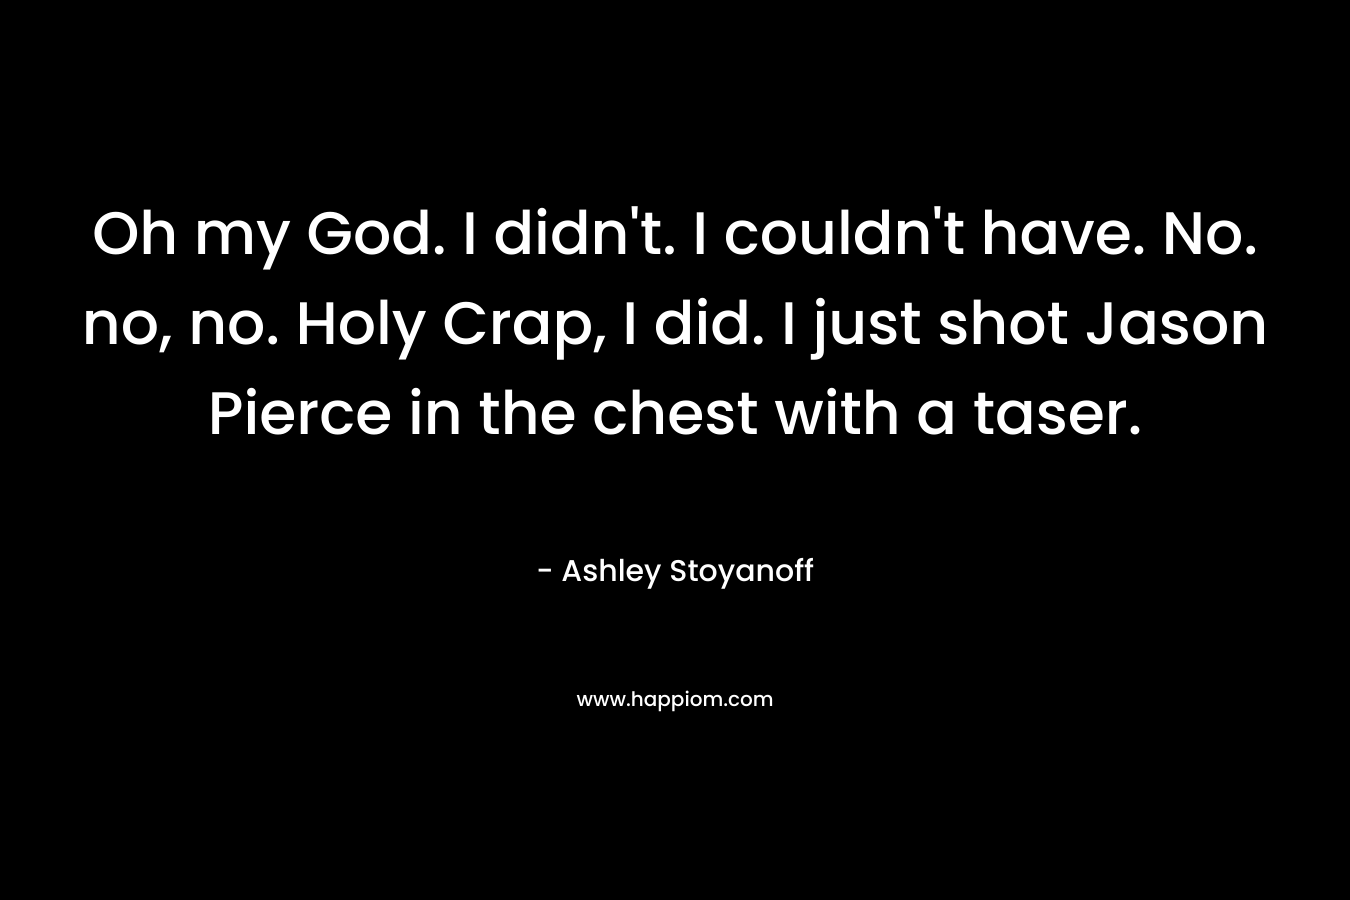 Oh my God. I didn’t. I couldn’t have. No. no, no. Holy Crap, I did. I just shot Jason Pierce in the chest with a taser. – Ashley Stoyanoff